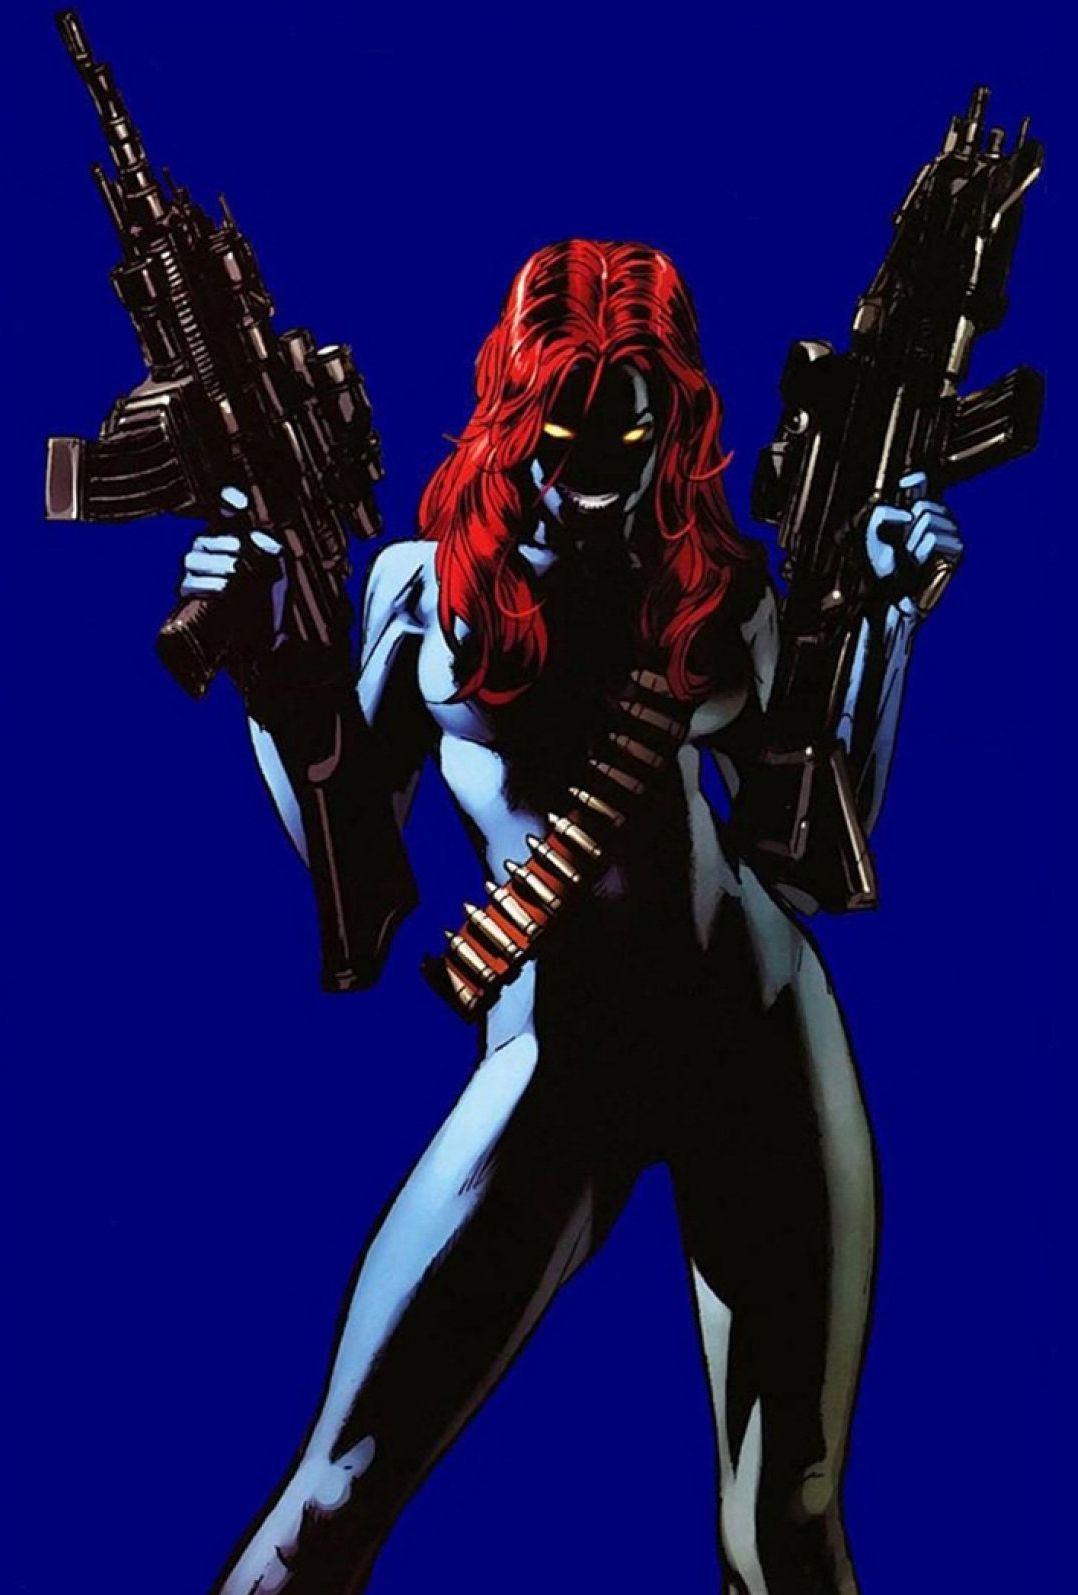 30 Hot Pictures Of Mystique From Marvel Comics | Best Of Comic Books